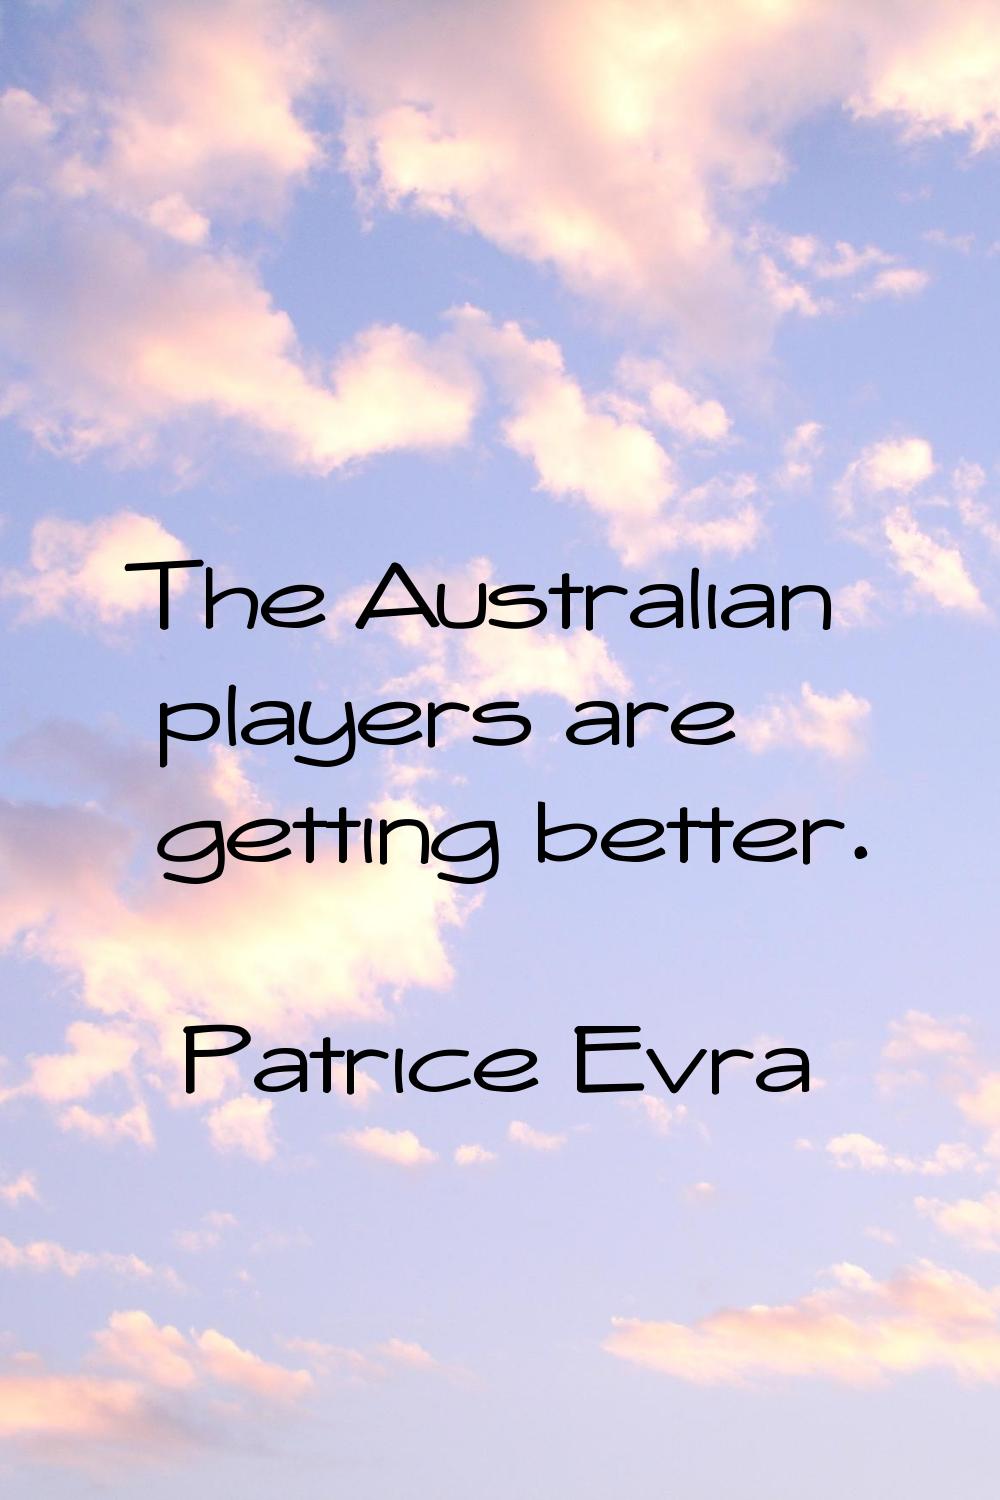 The Australian players are getting better.